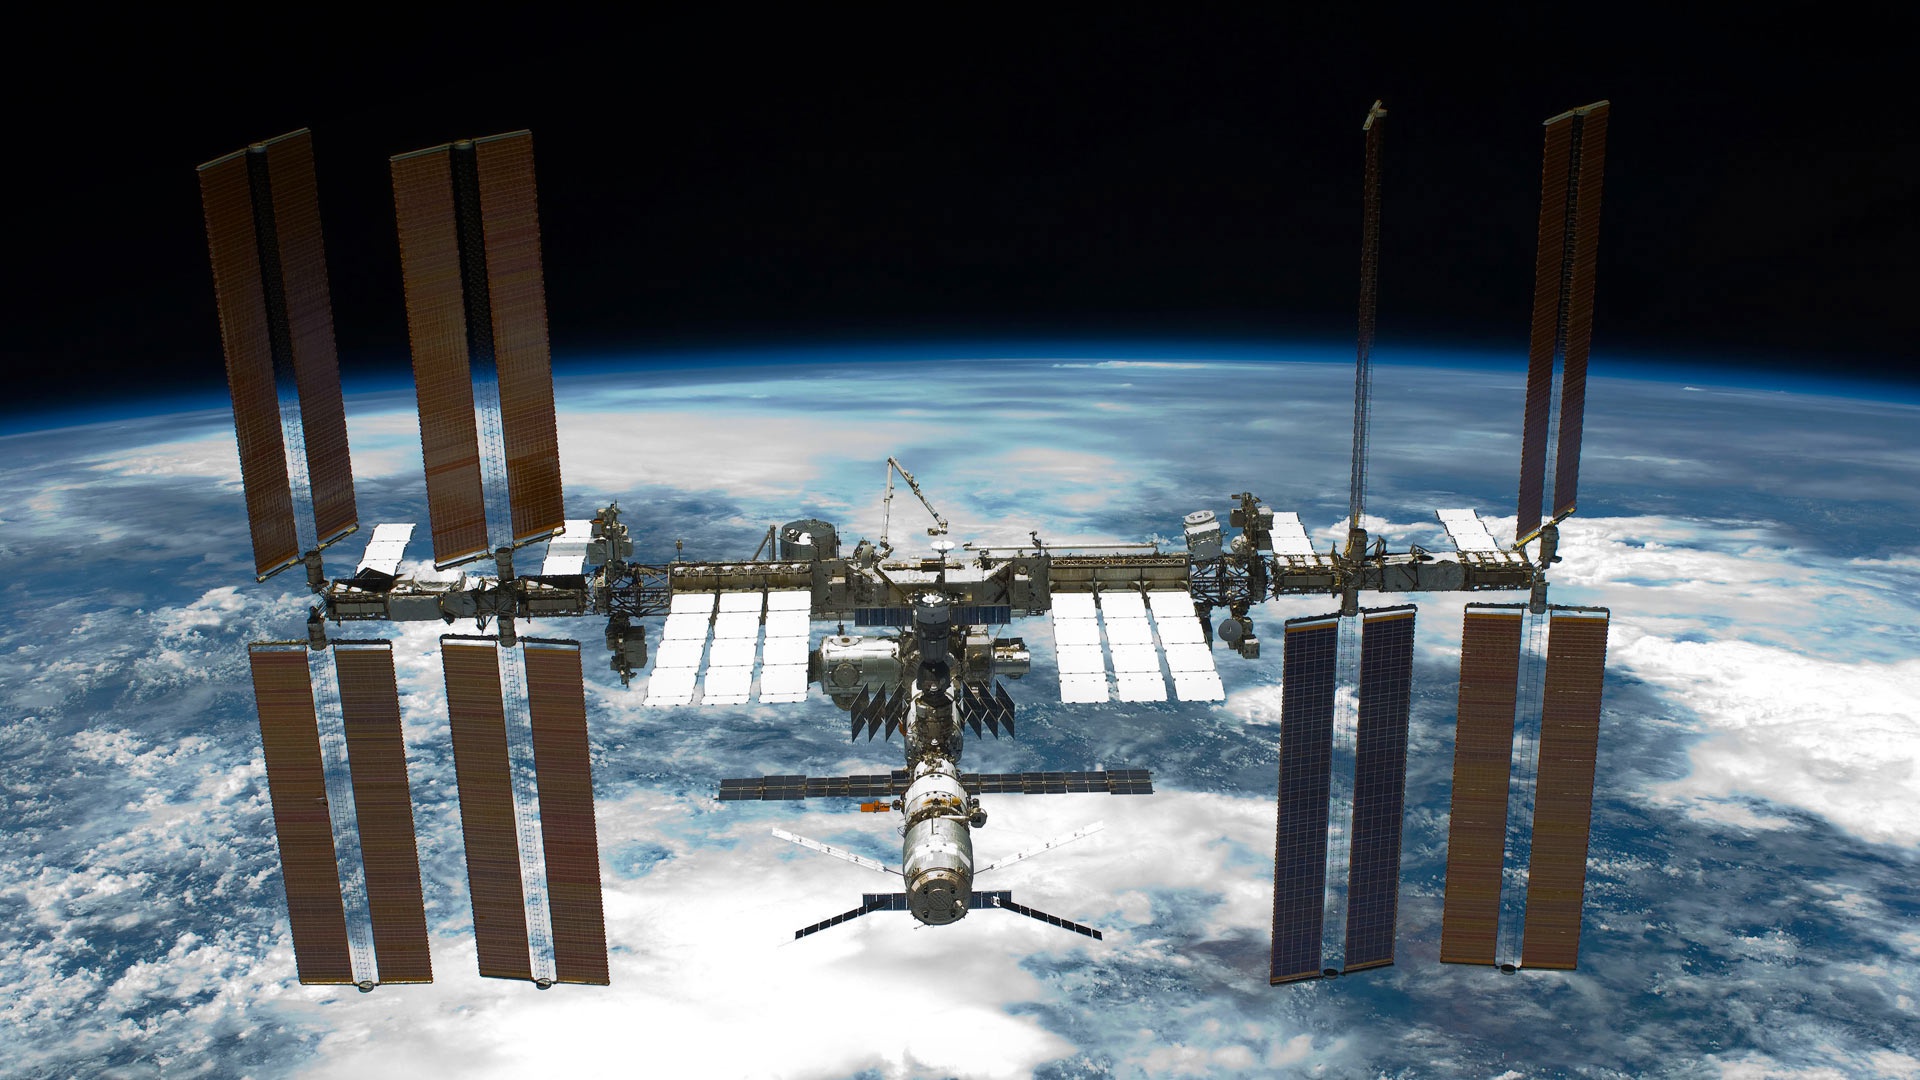 General 1920x1080 space Earth space station International Space Station